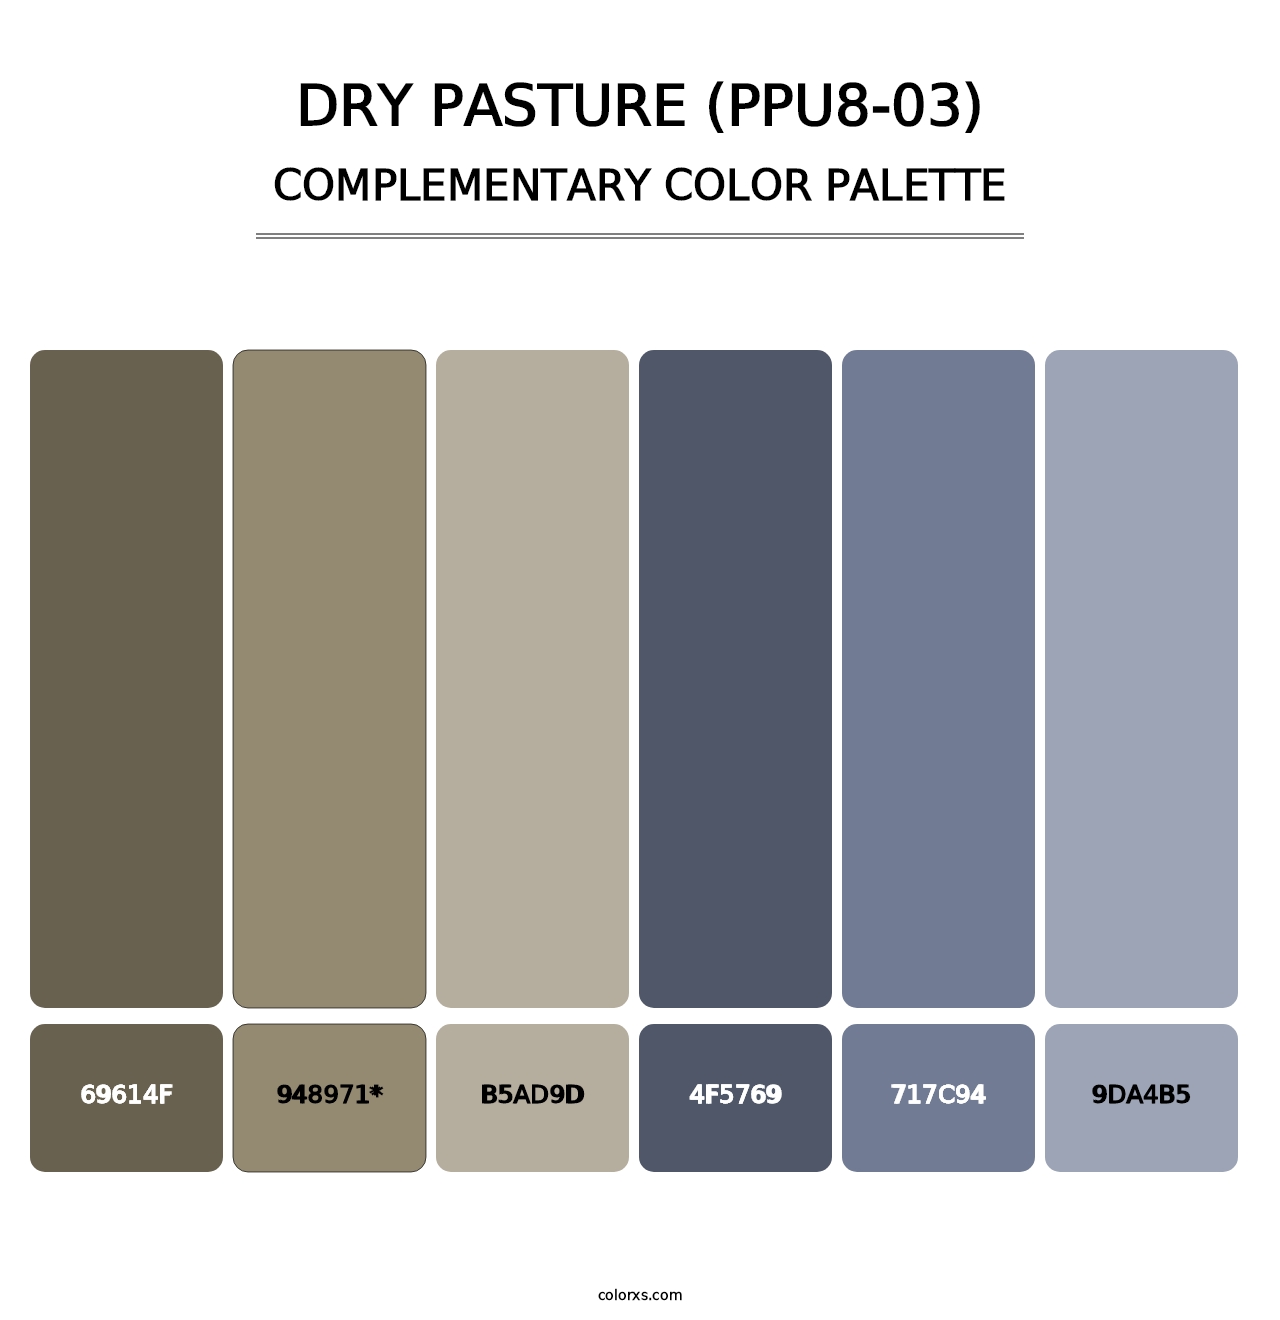 Dry Pasture (PPU8-03) - Complementary Color Palette